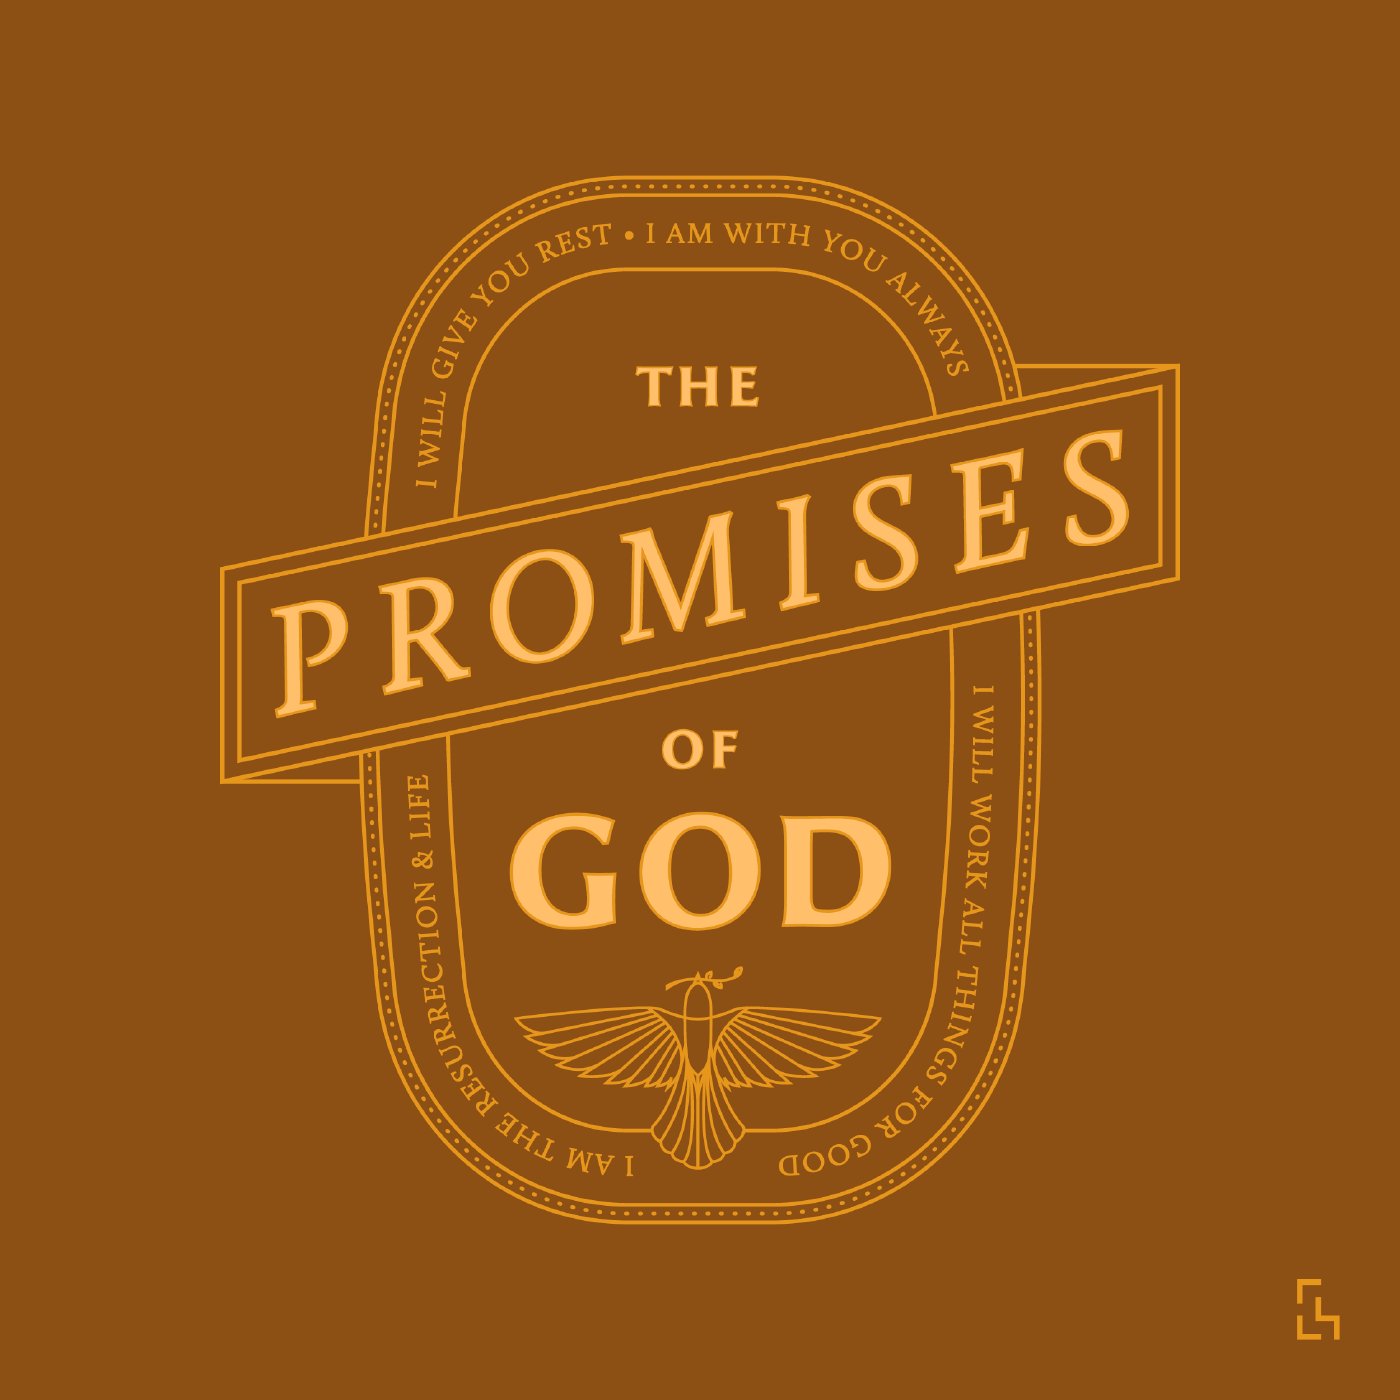 The Promises of God - You Will Rejoice